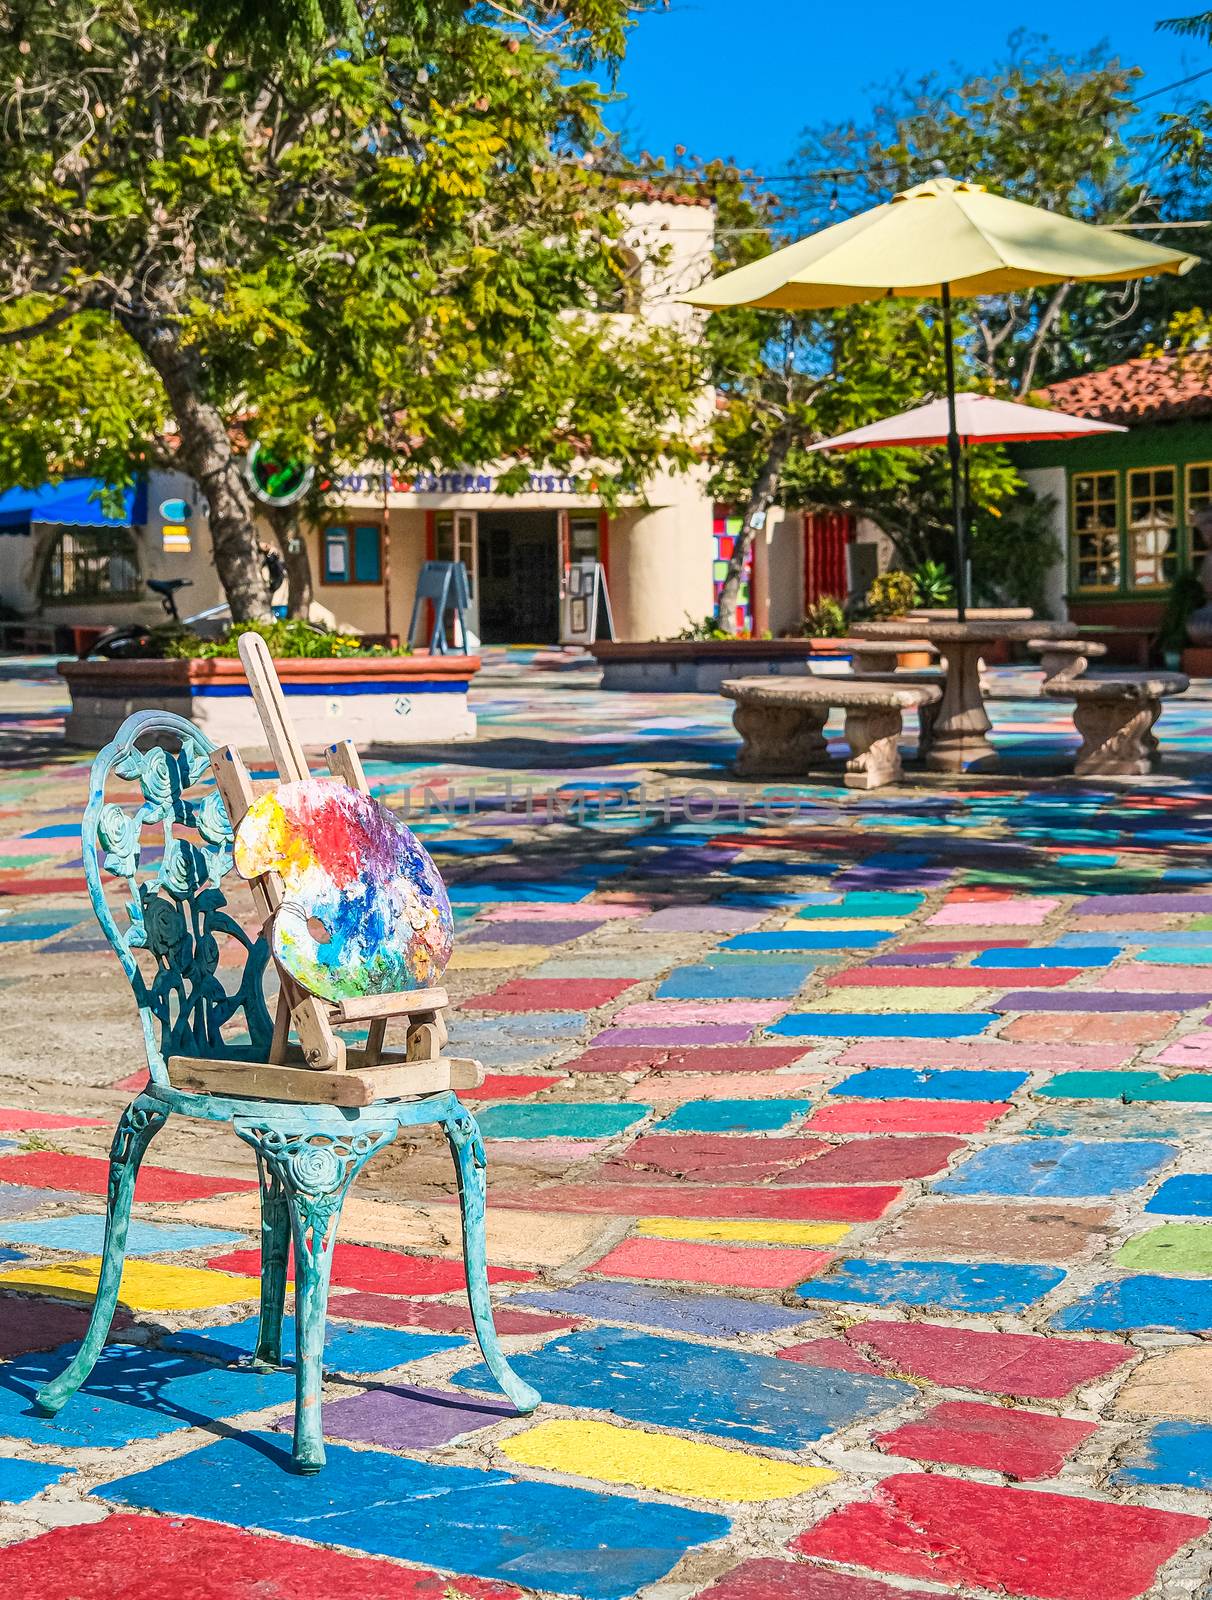 Artist Palette in Chair in Colorful Courtyard